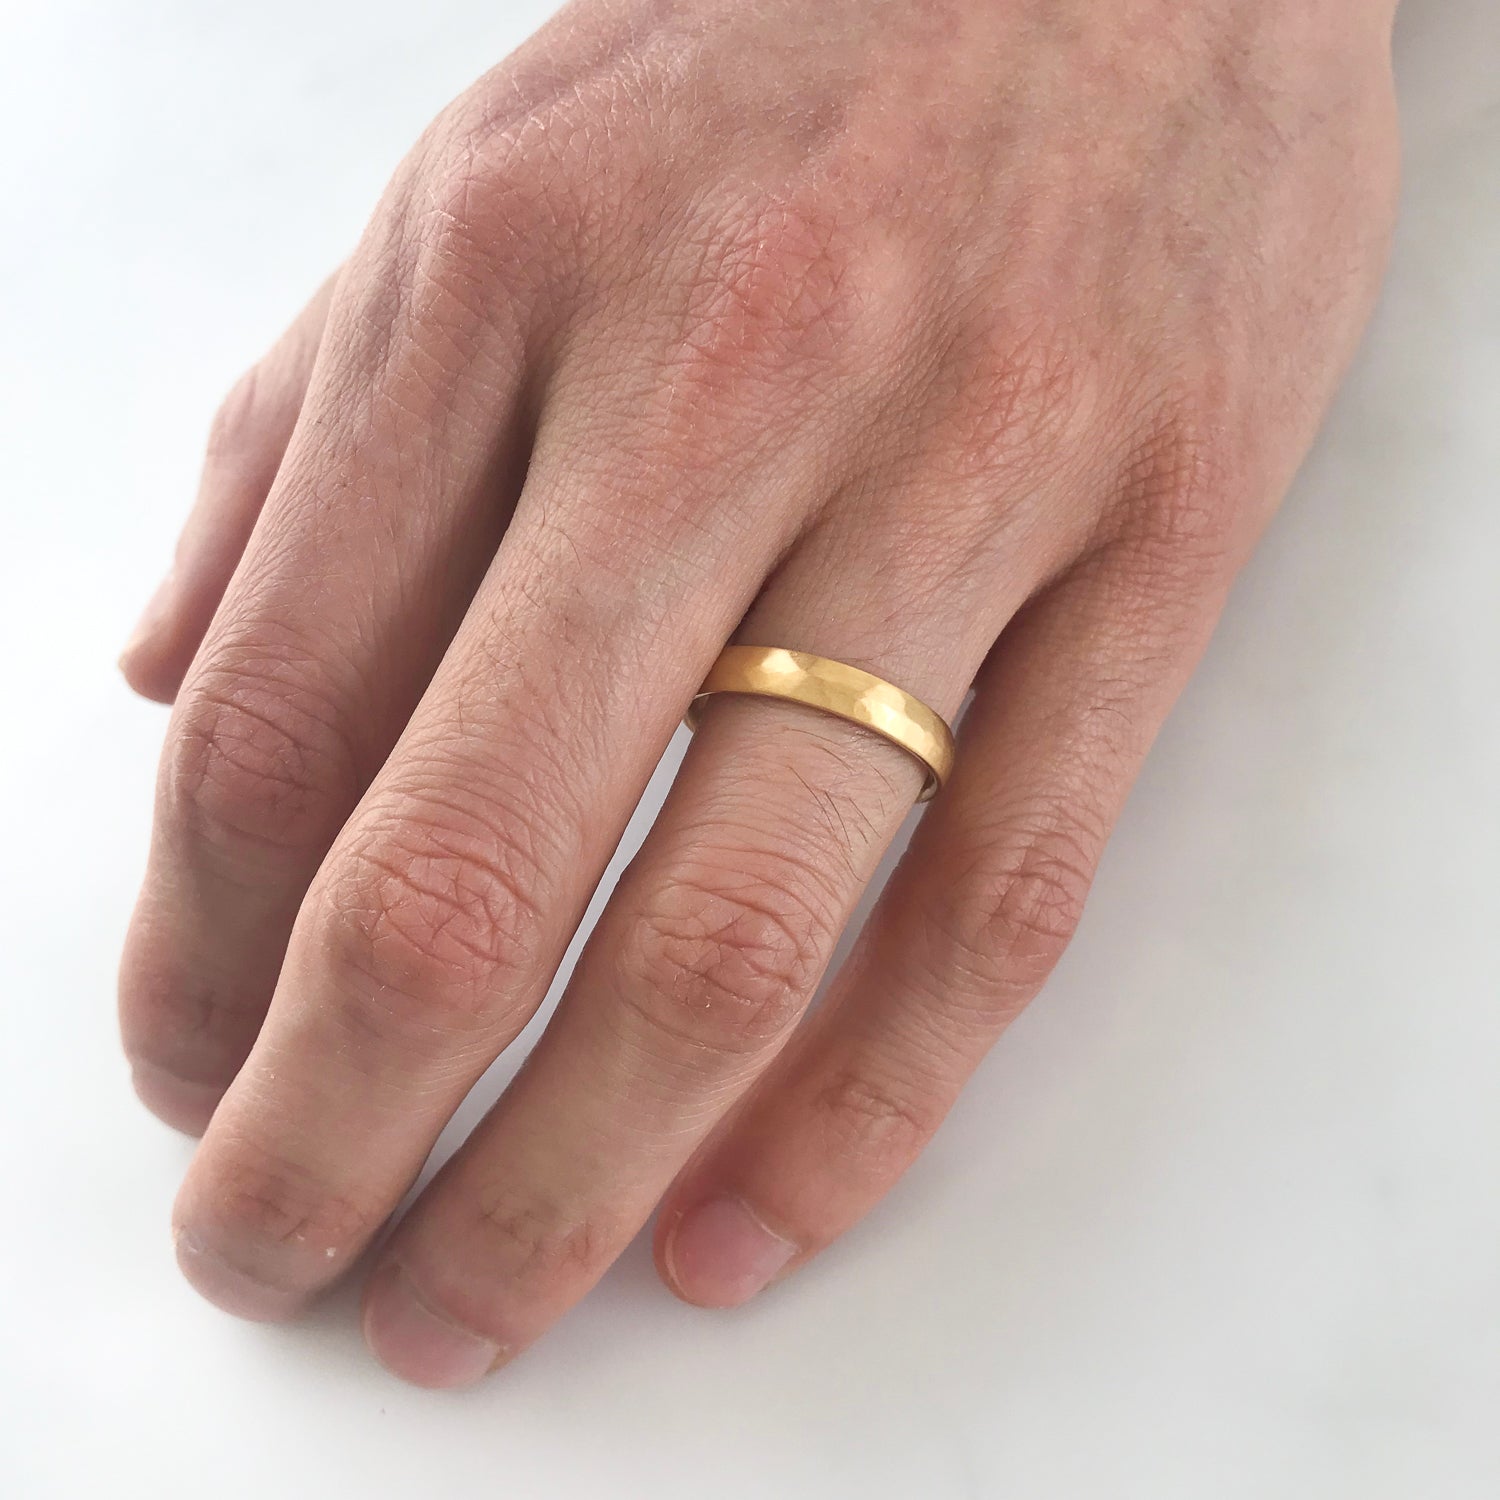 Durability for Wedding Bands – Aide-mémoire